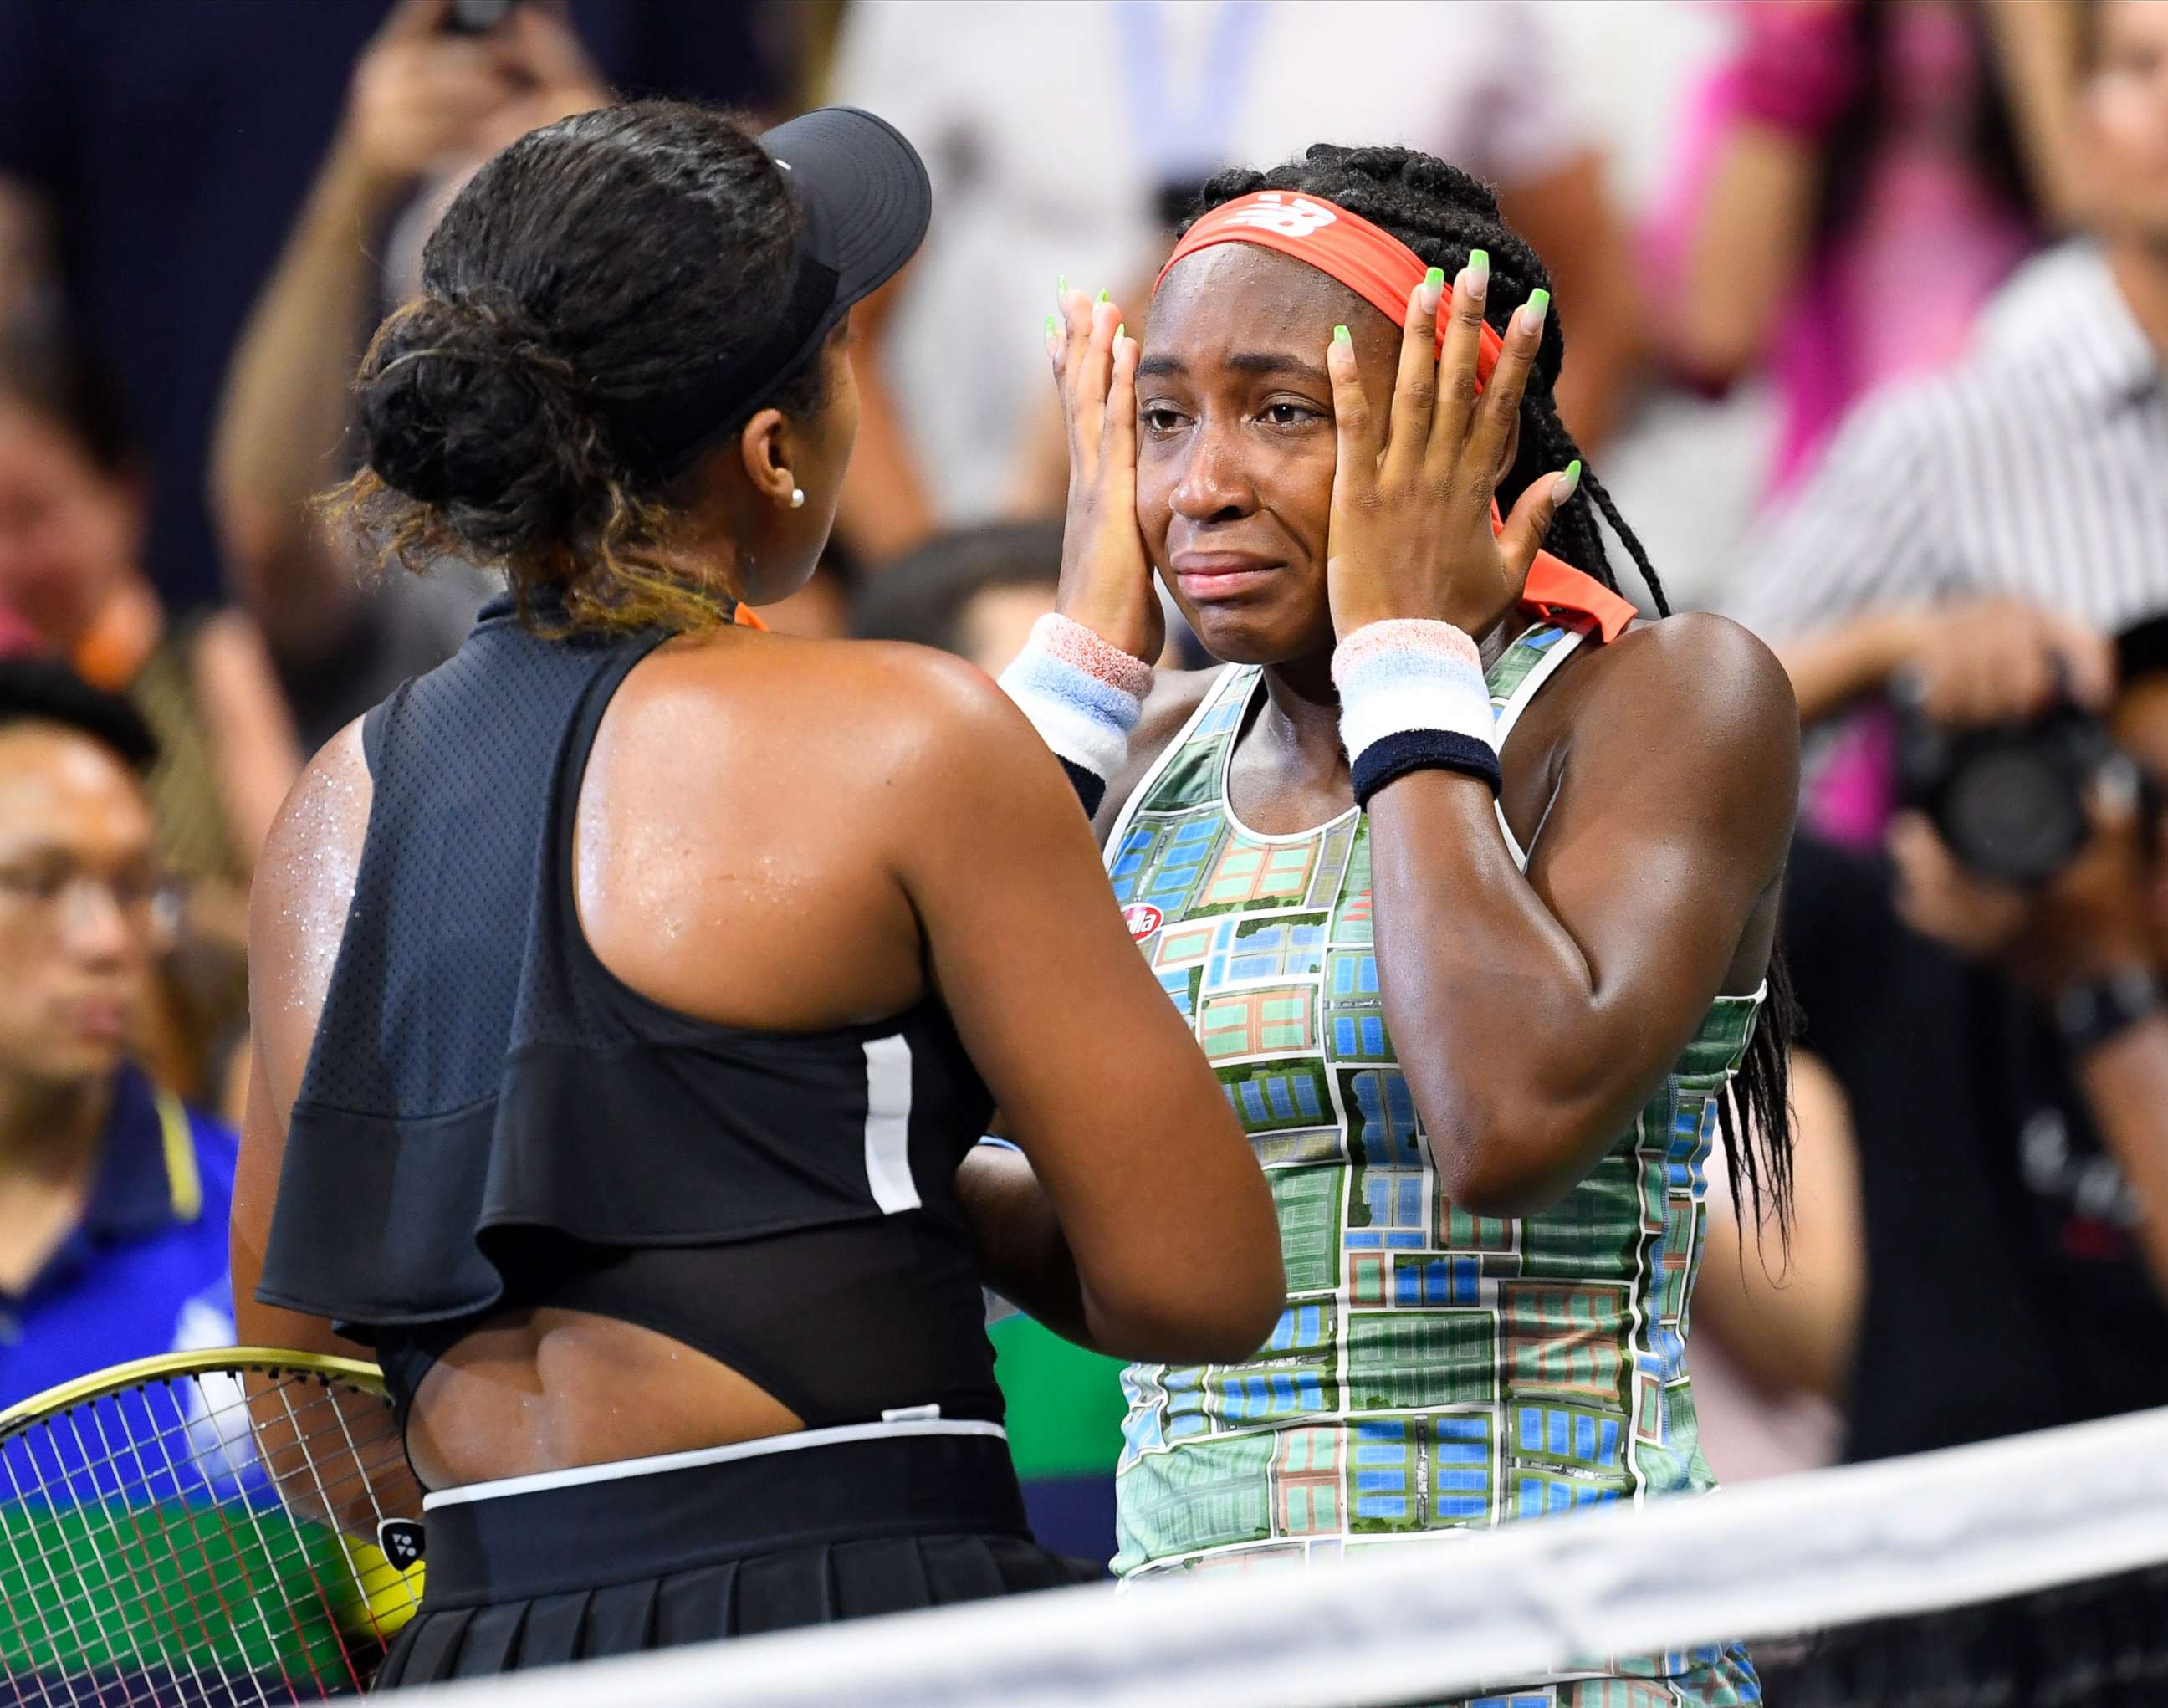 Coco Gauff defeated by Naomi Osaka in emotional 3rd round match at US Open 